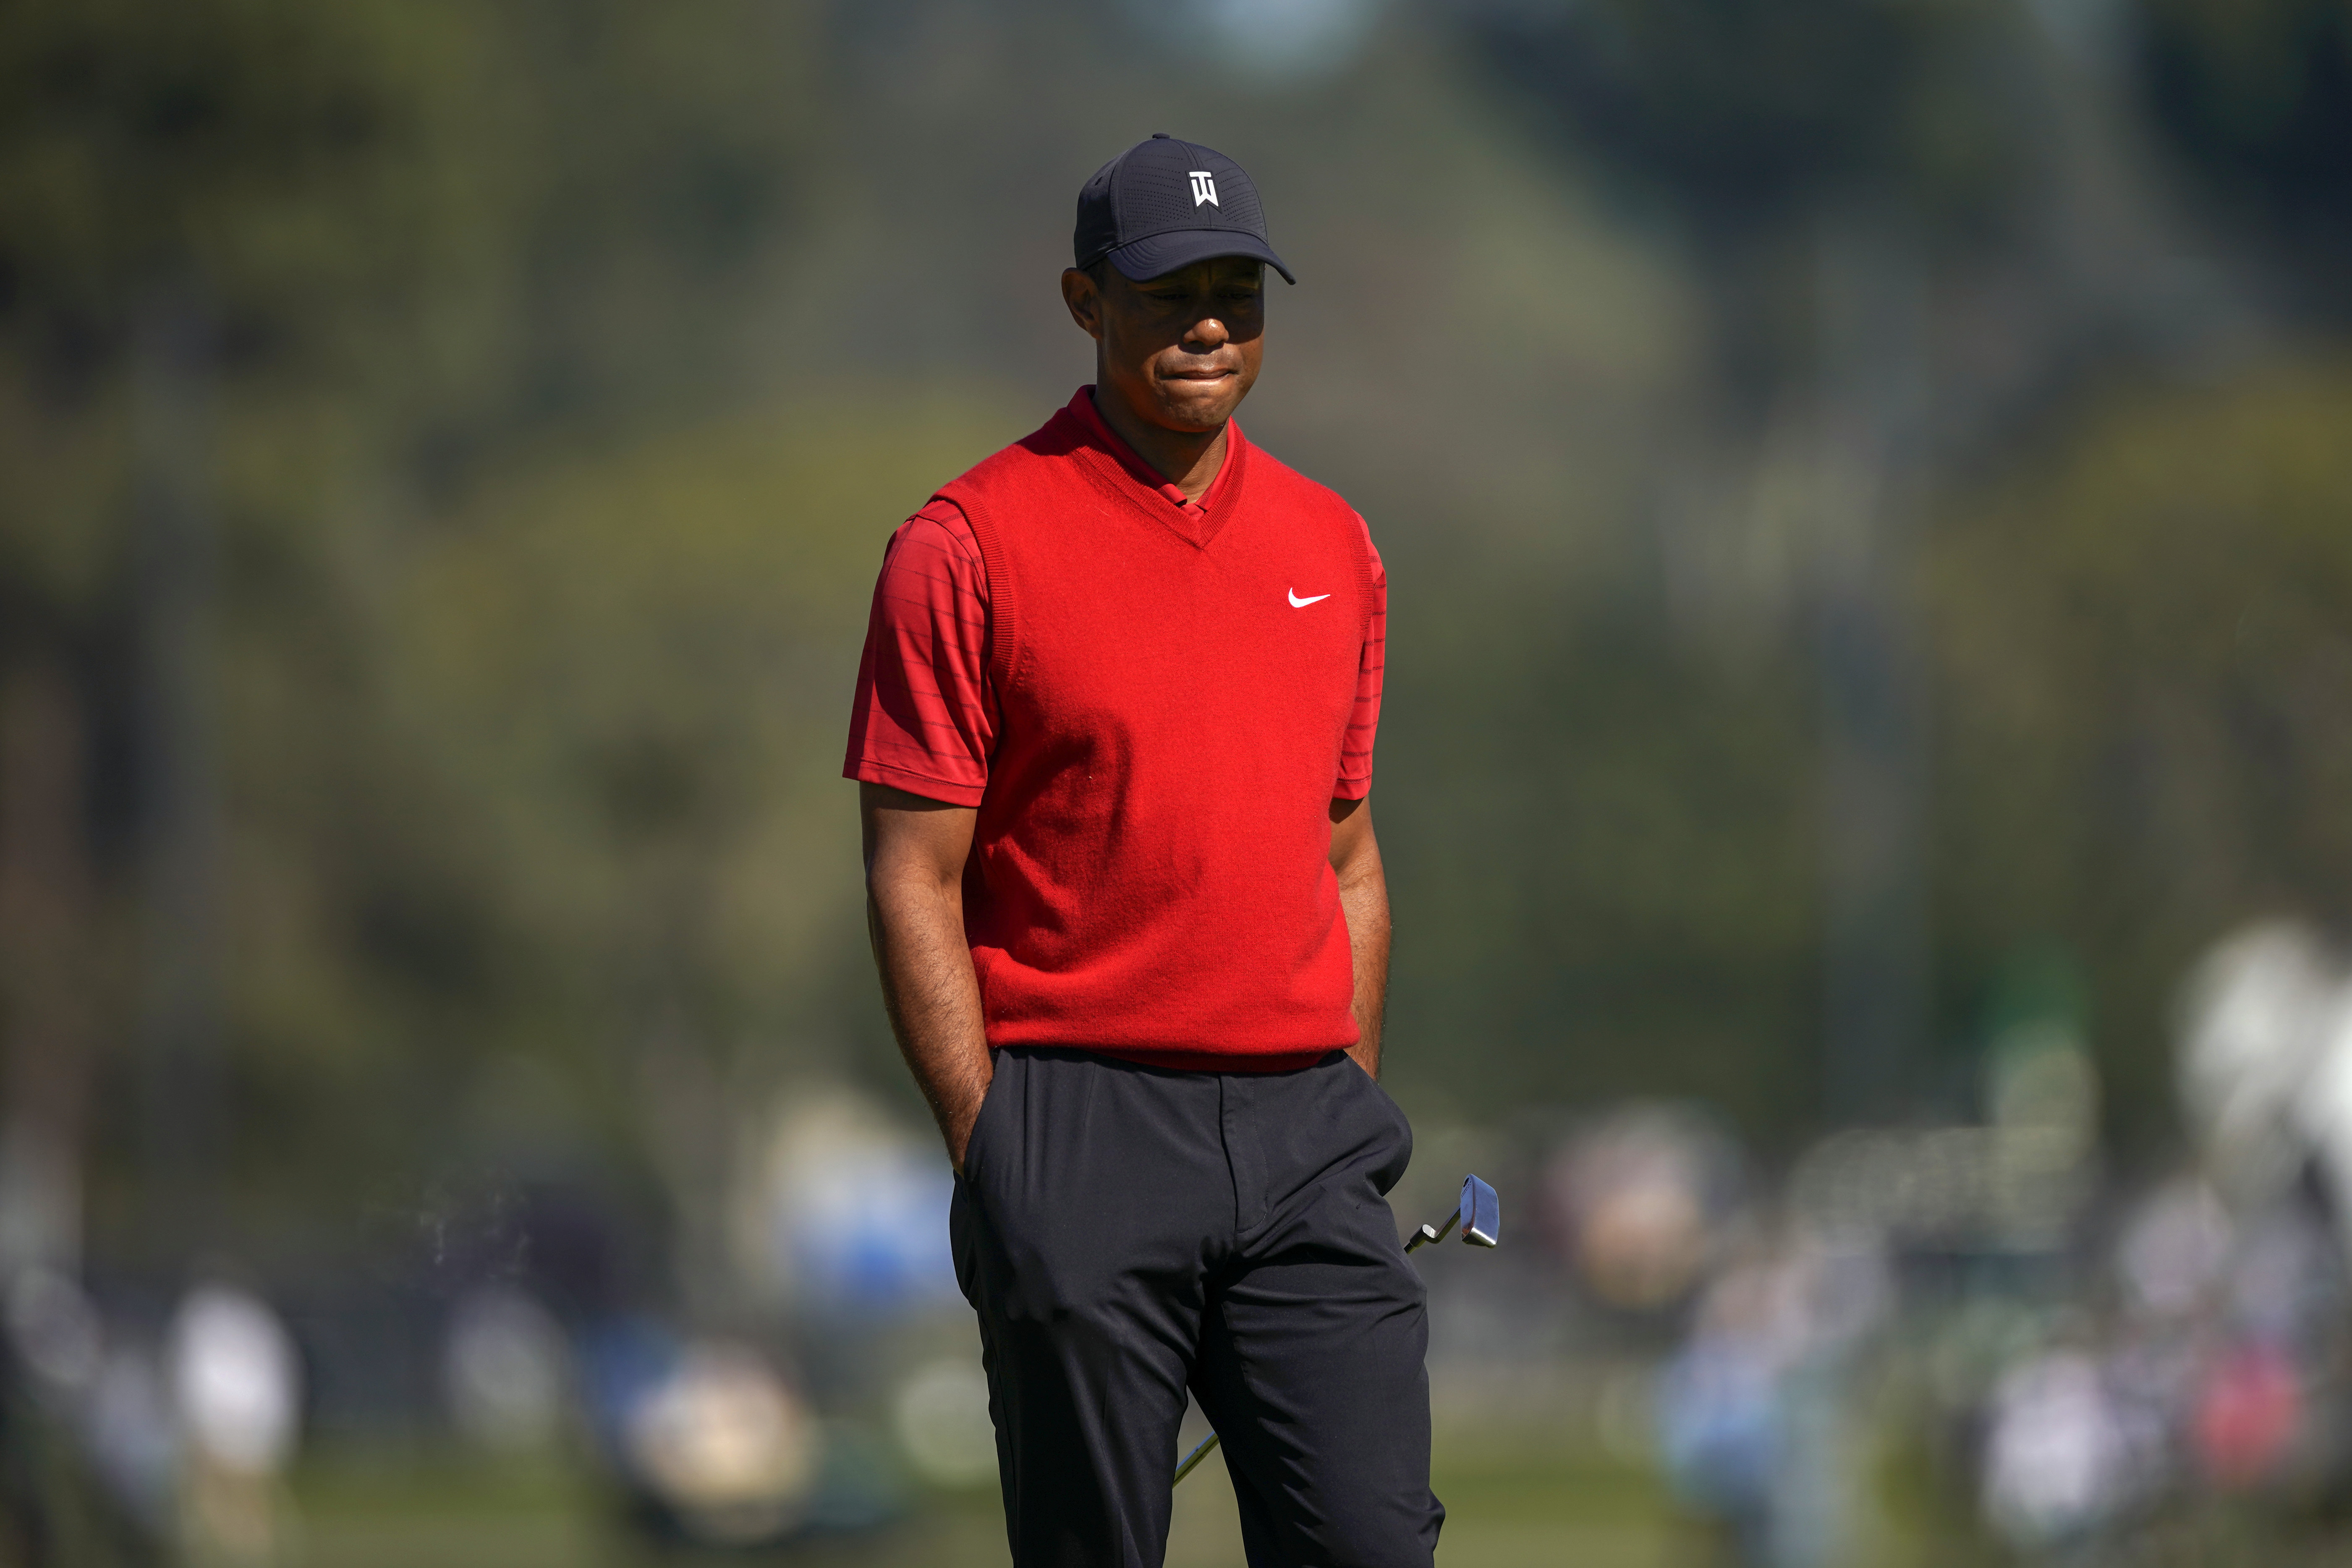 Tiger Woods at Memorial (7/16/20) How to get free live stream and TV options to watch PGA Tour event